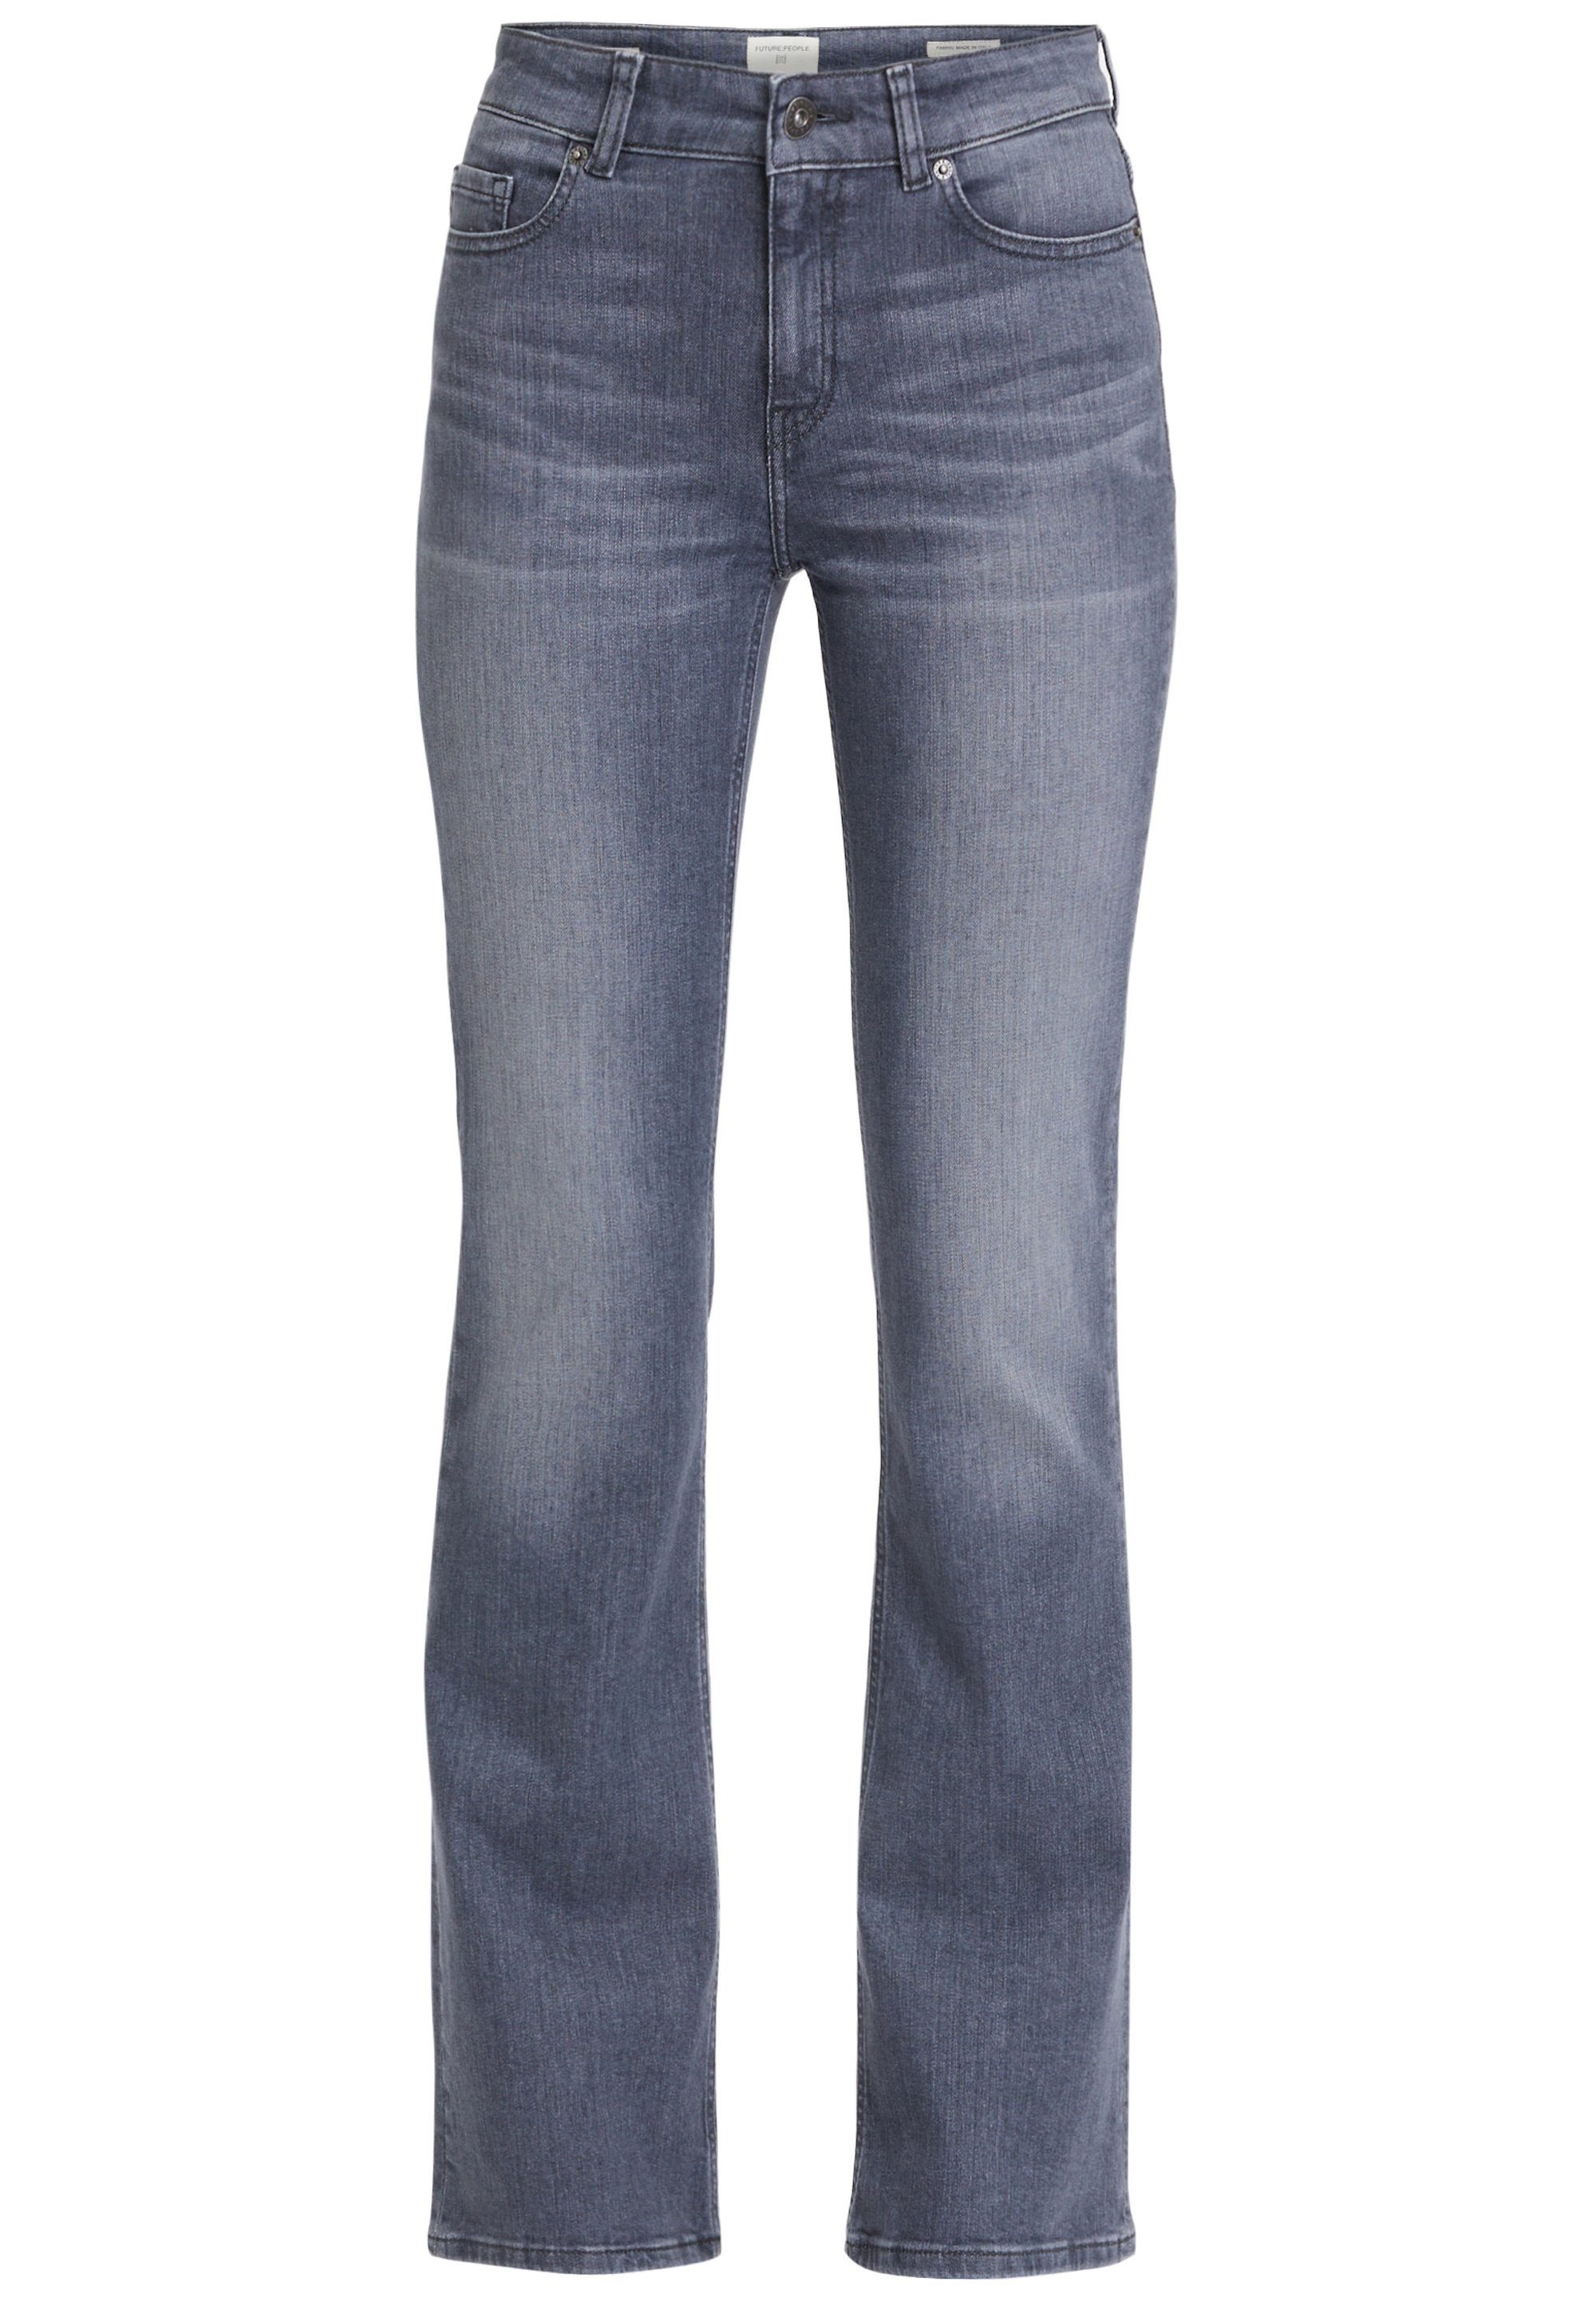 #WeC4F BOOTCUT Care USED We FUTURE:PEOPLE. 01:02 Future. - - GREY Slim-fit-Jeans MID WAIST for AUTHENTIC